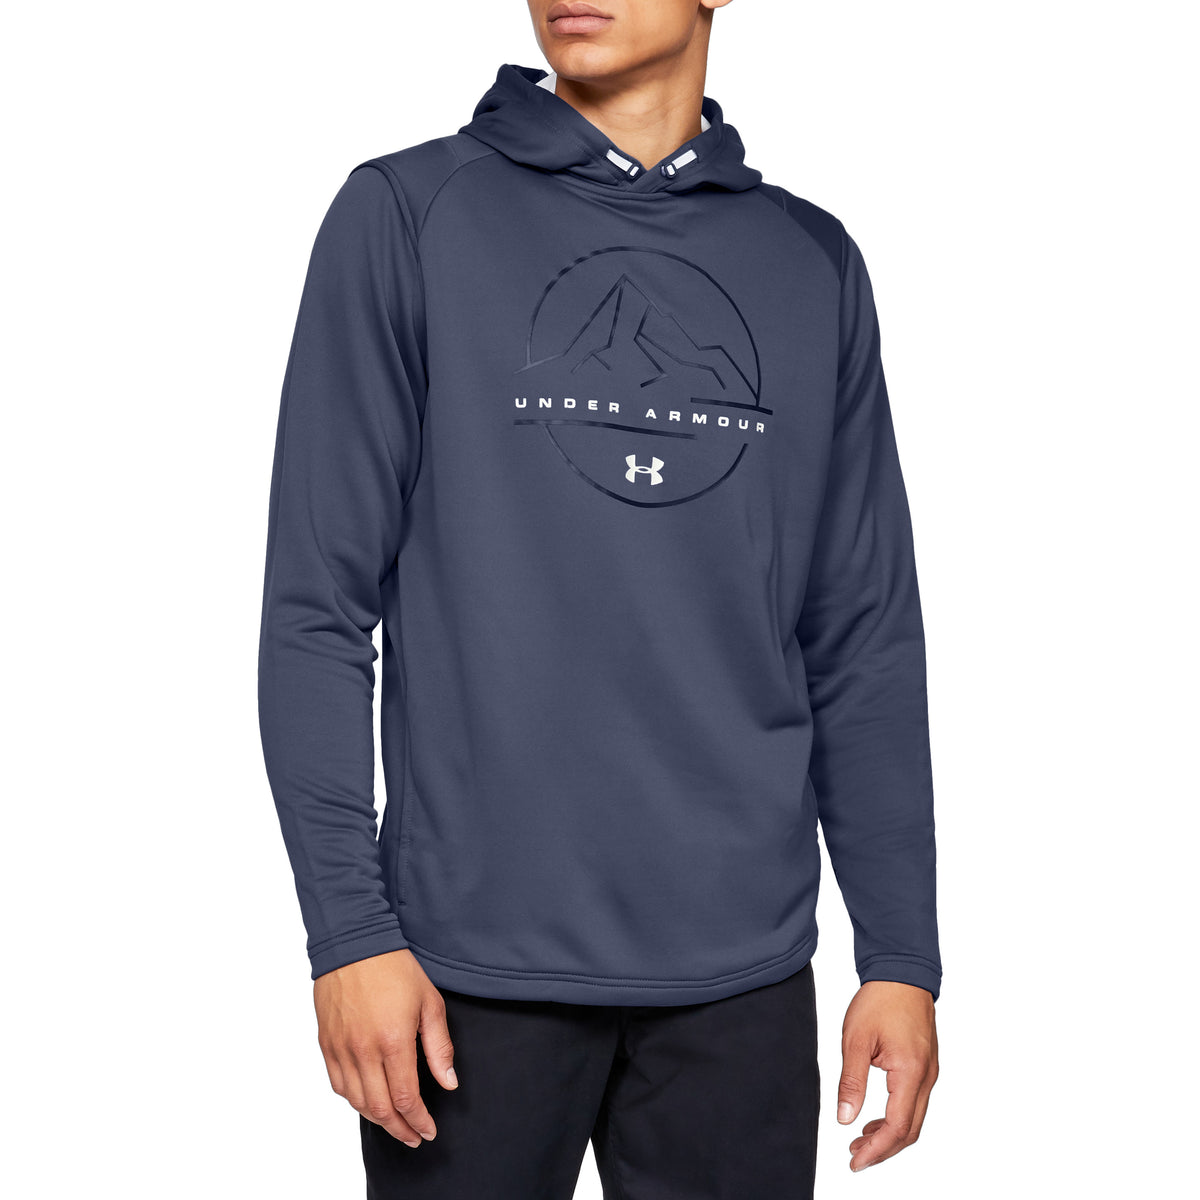 Under Armour Mens Tech Terry Hoodie